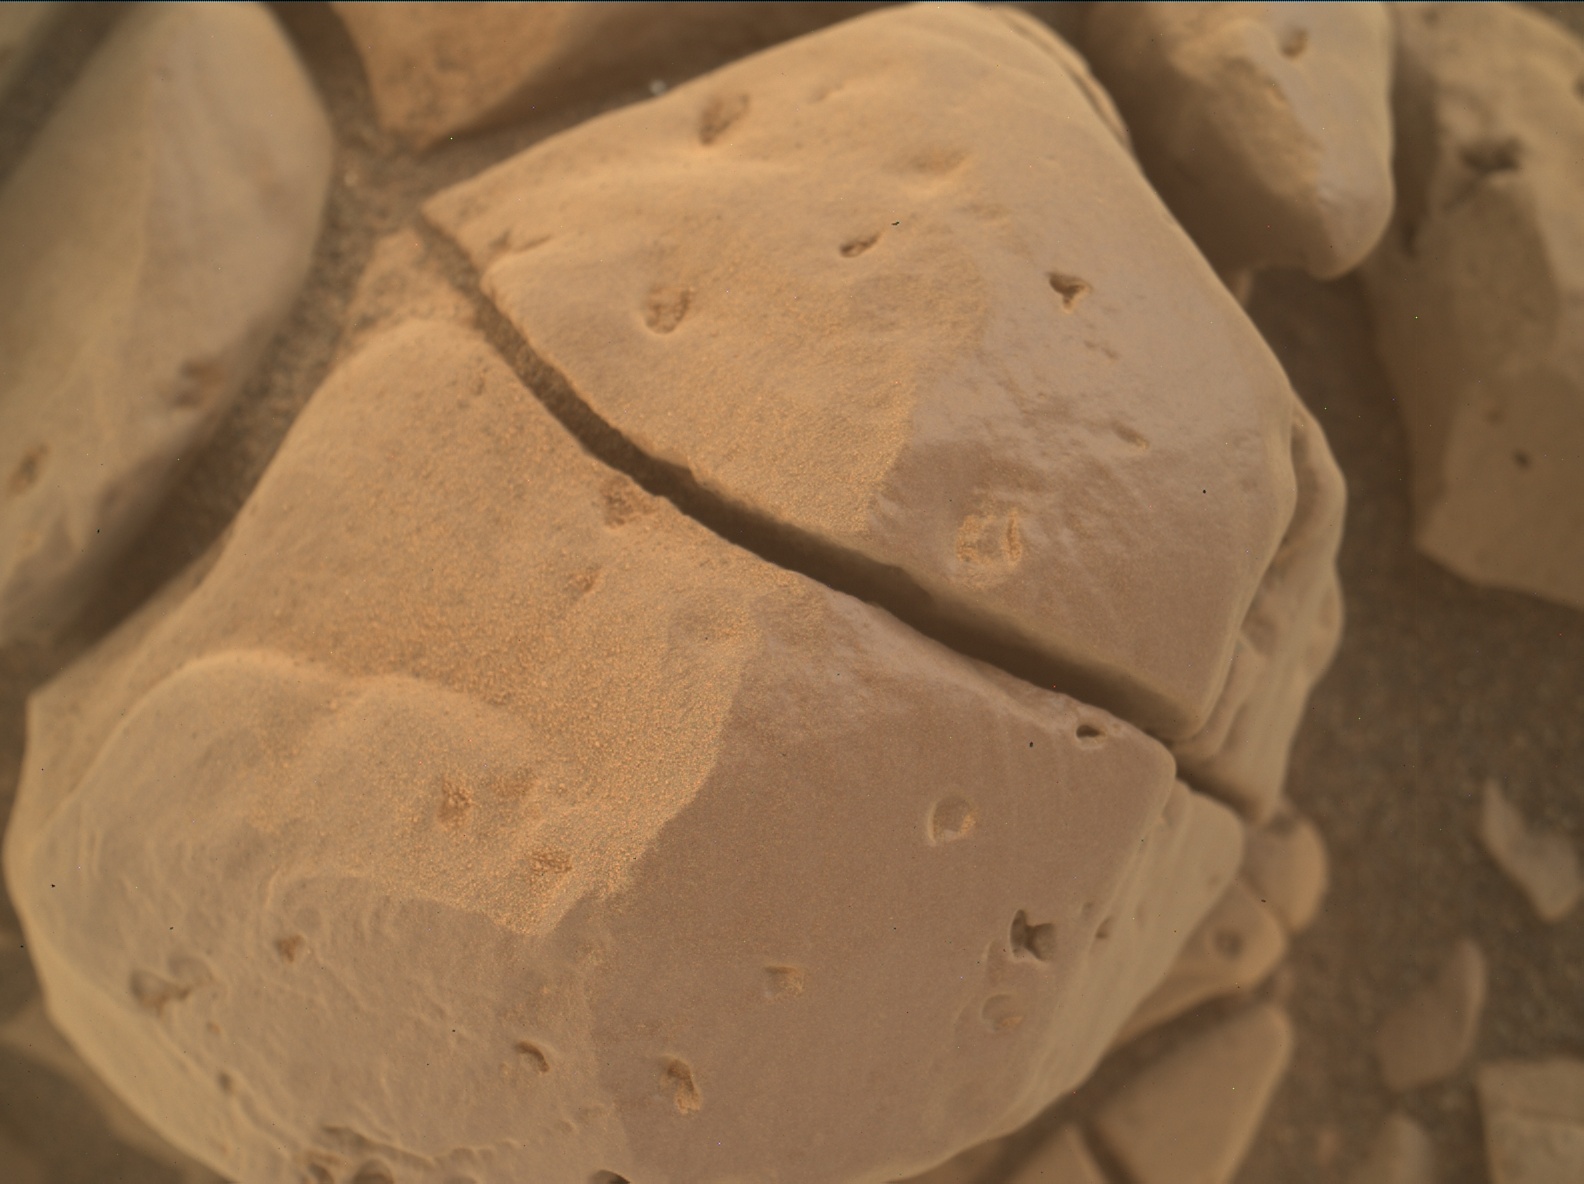 Nasa's Mars rover Curiosity acquired this image using its Mars Hand Lens Imager (MAHLI) on Sol 2442